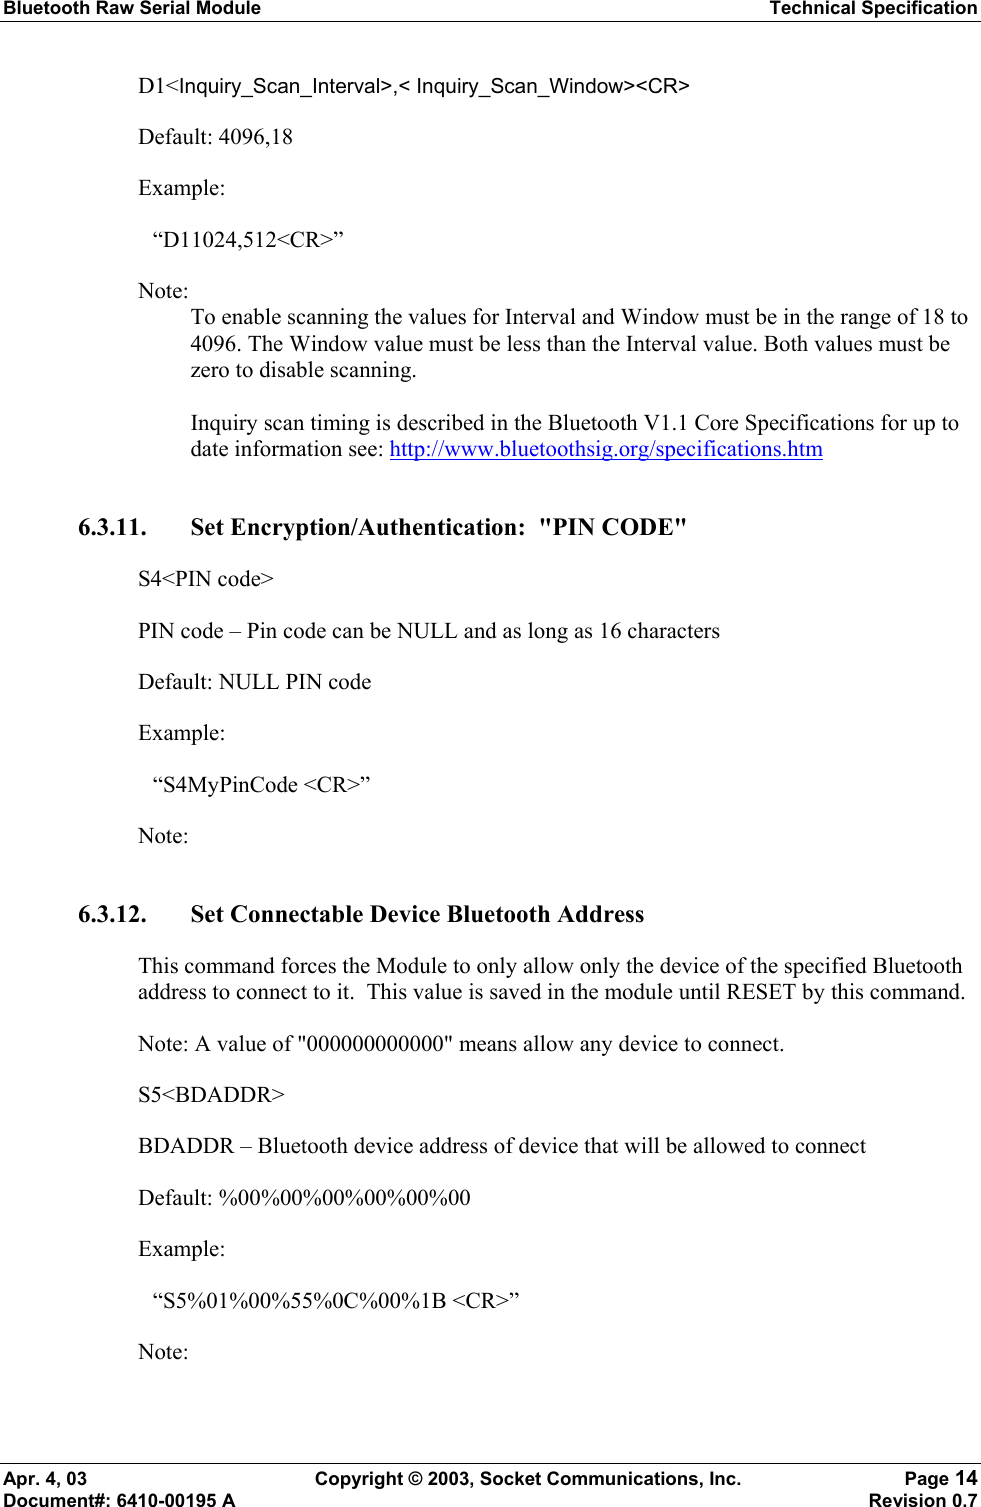 Bluetooth Raw Serial Module Technical Specification Apr. 4, 03  Copyright © 2003, Socket Communications, Inc.  Page 14 Document#: 6410-00195 A    Revision 0.7 D1&lt;Inquiry_Scan_Interval&gt;,&lt; Inquiry_Scan_Window&gt;&lt;CR&gt; Default: 4096,18 Example:  “D11024,512&lt;CR&gt;” Note:  To enable scanning the values for Interval and Window must be in the range of 18 to 4096. The Window value must be less than the Interval value. Both values must be zero to disable scanning.  Inquiry scan timing is described in the Bluetooth V1.1 Core Specifications for up to date information see: http://www.bluetoothsig.org/specifications.htm 6.3.11. Set Encryption/Authentication:  &quot;PIN CODE&quot;  S4&lt;PIN code&gt; PIN code – Pin code can be NULL and as long as 16 characters Default: NULL PIN code Example:  “S4MyPinCode &lt;CR&gt;” Note:  6.3.12. Set Connectable Device Bluetooth Address This command forces the Module to only allow only the device of the specified Bluetooth address to connect to it.  This value is saved in the module until RESET by this command. Note: A value of &quot;000000000000&quot; means allow any device to connect. S5&lt;BDADDR&gt; BDADDR – Bluetooth device address of device that will be allowed to connect Default: %00%00%00%00%00%00 Example:  “S5%01%00%55%0C%00%1B &lt;CR&gt;” Note:  